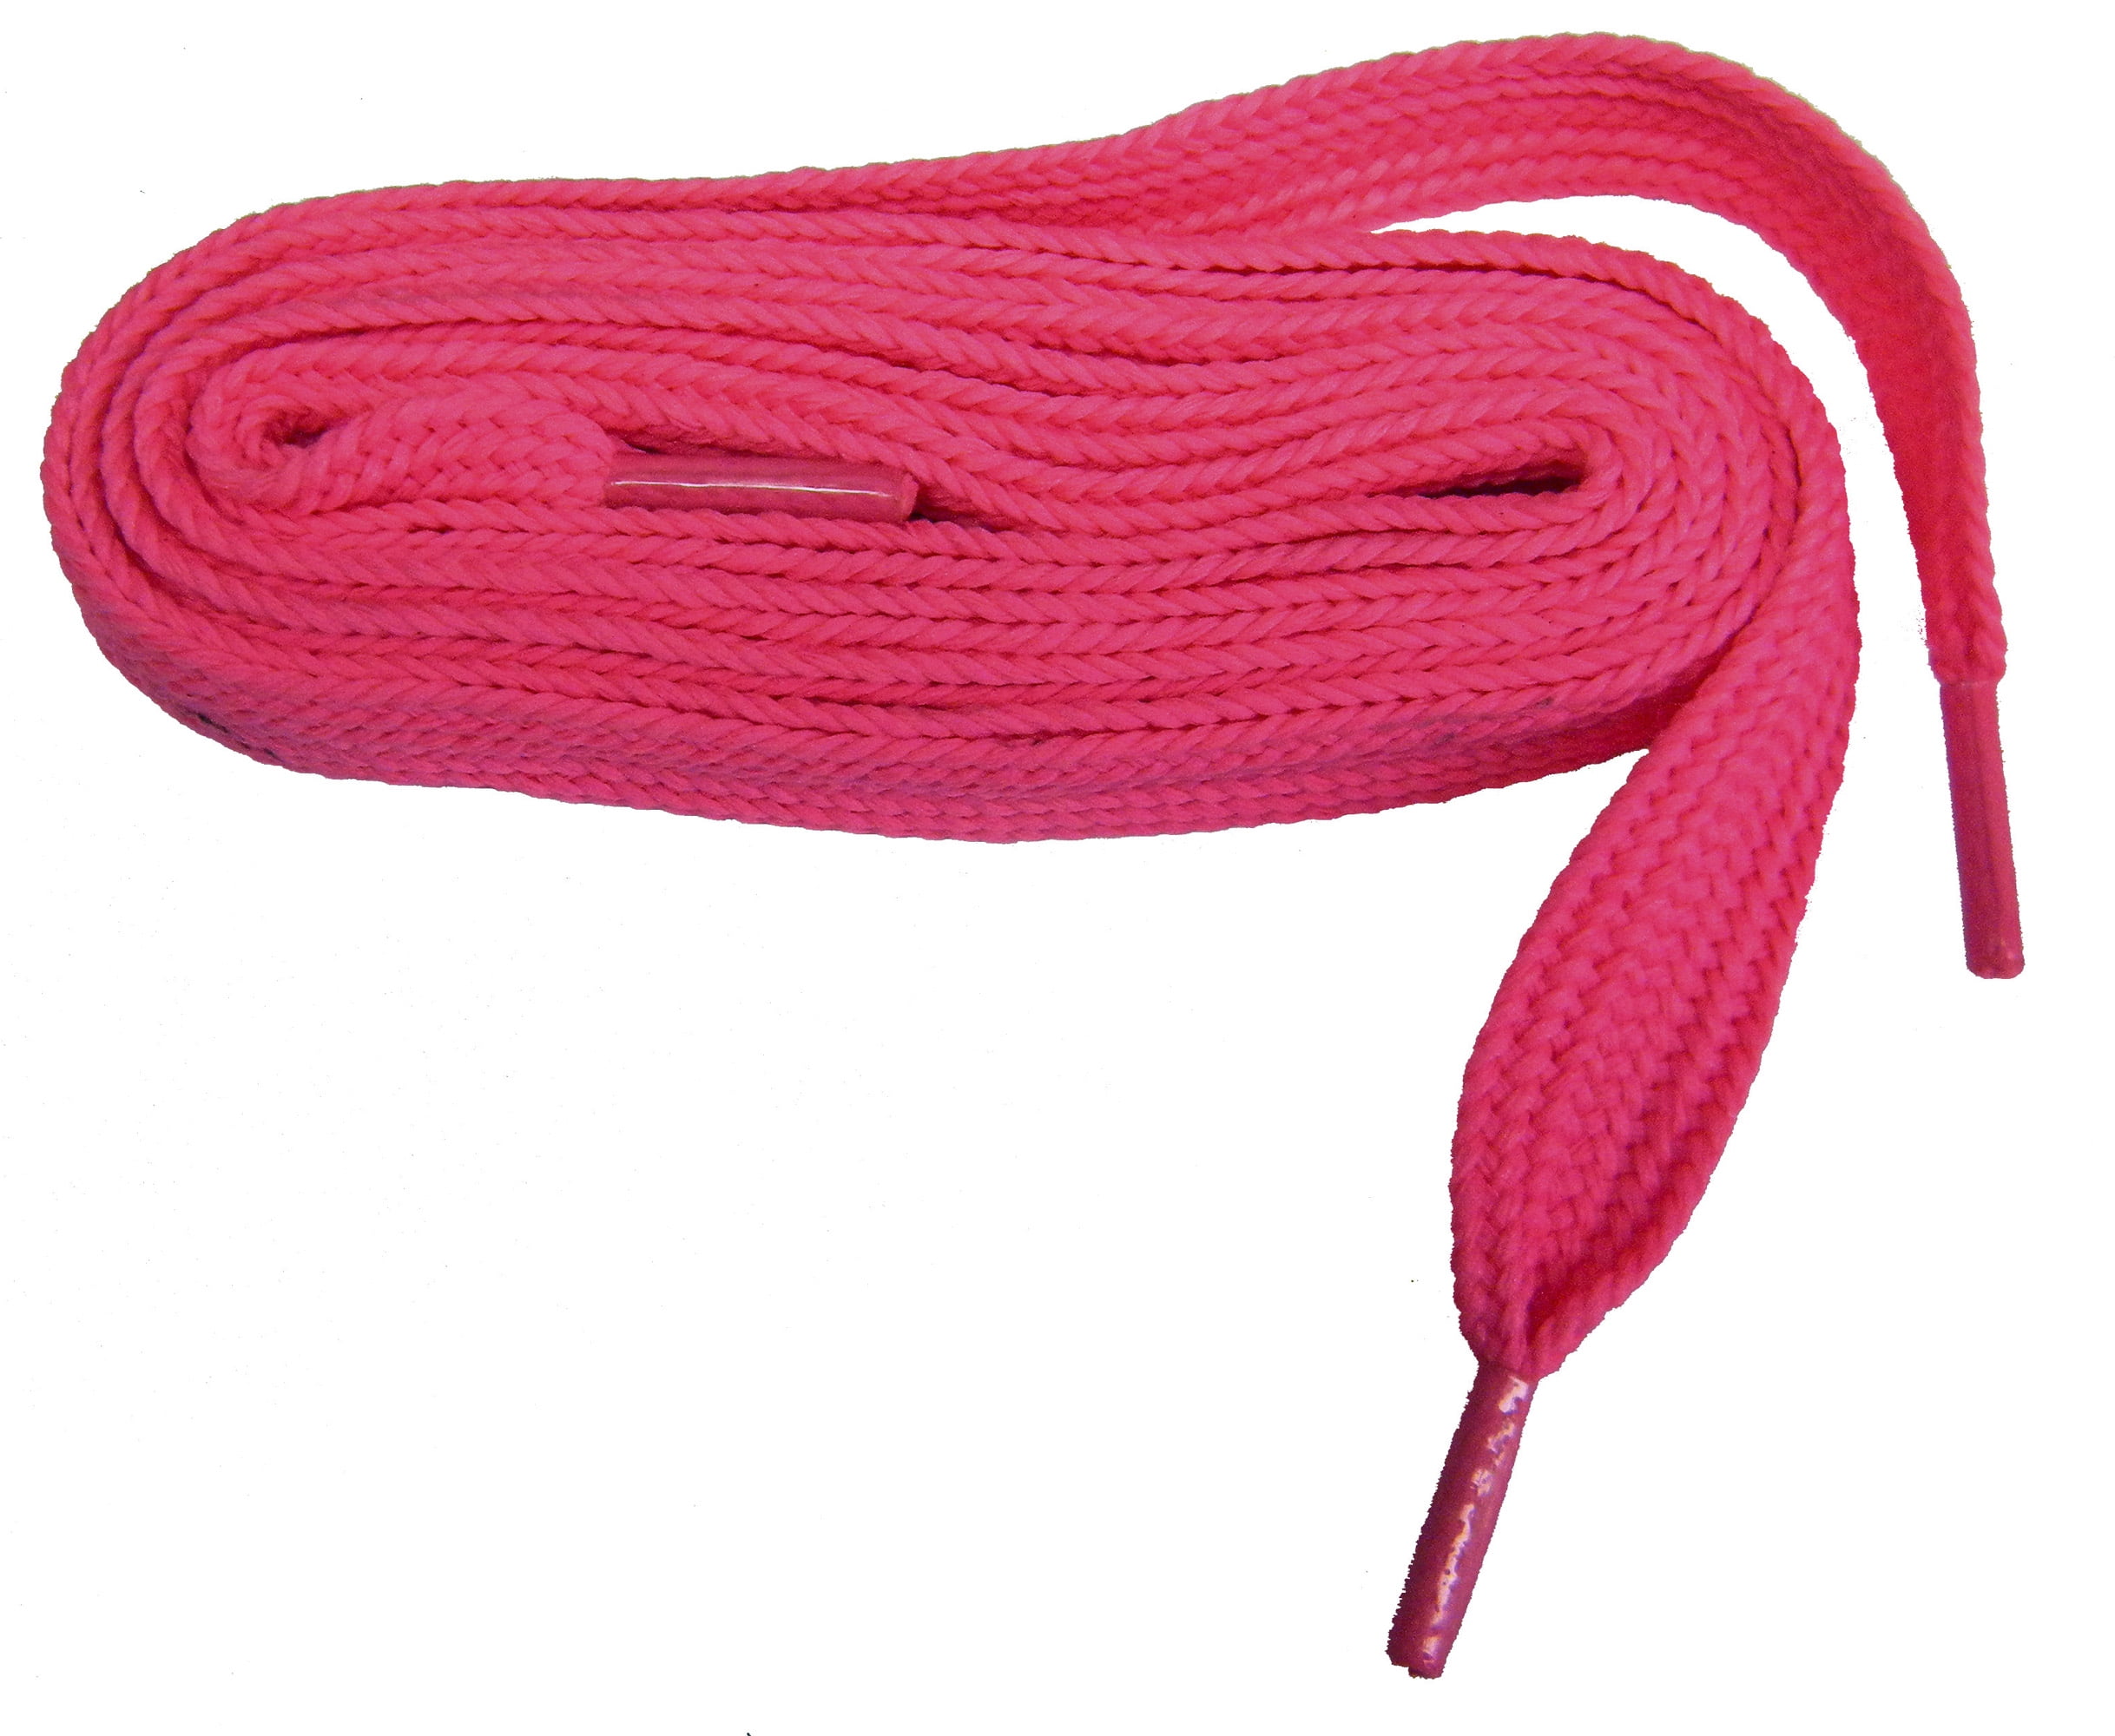 String Shoelace 2 Pairs Round Athletic Sport Sneaker "Hot Pink" 27",36",45",54" 